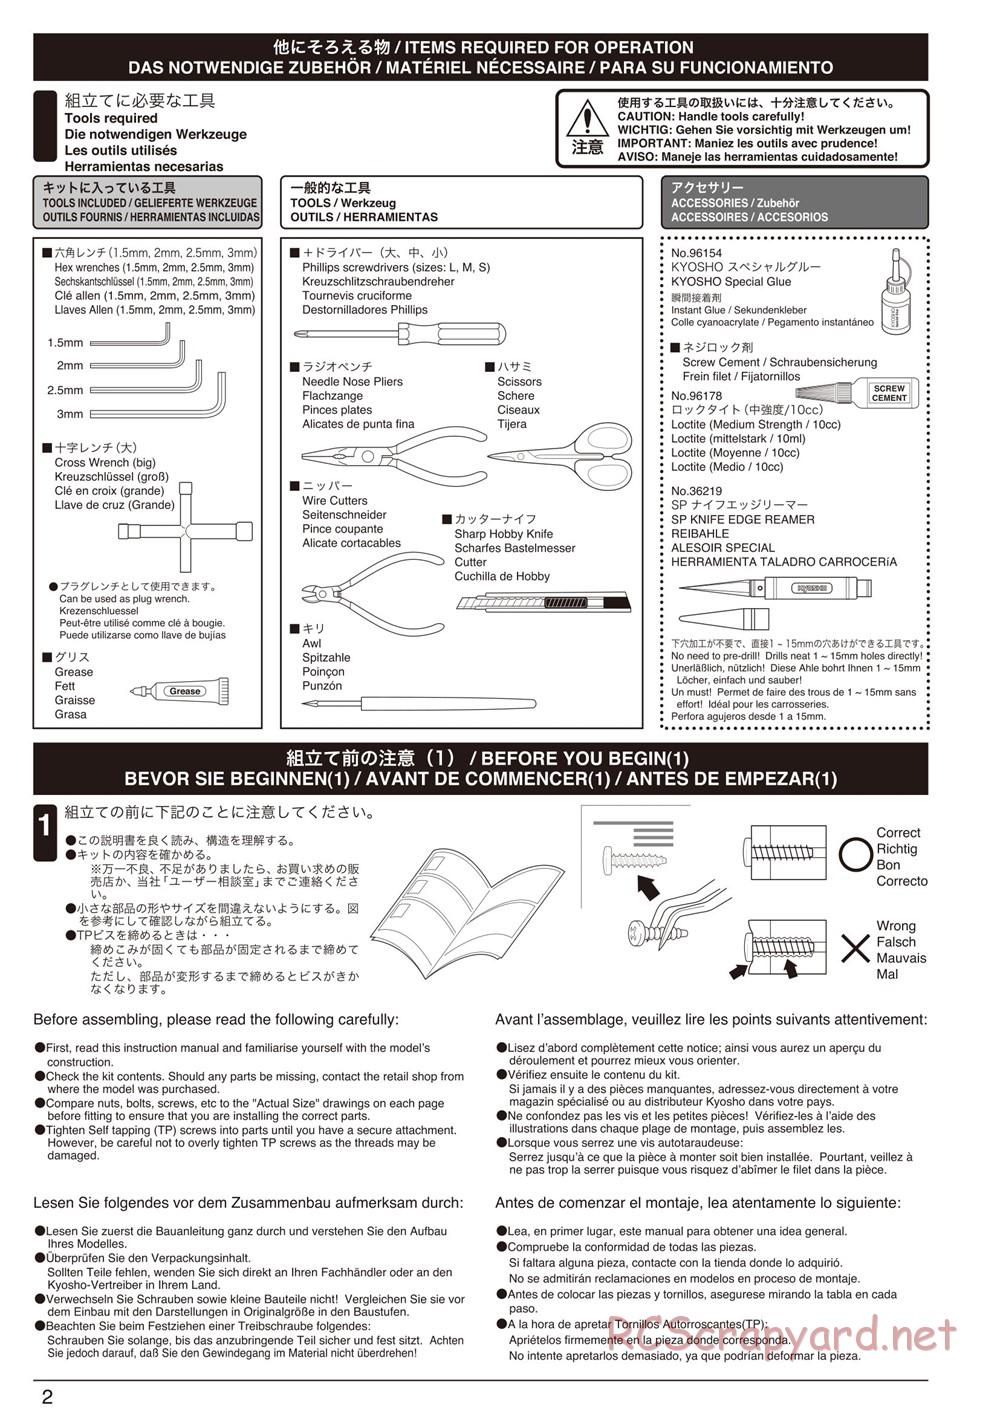 Kyosho - Mad Force Cruiser - Manual - Page 2